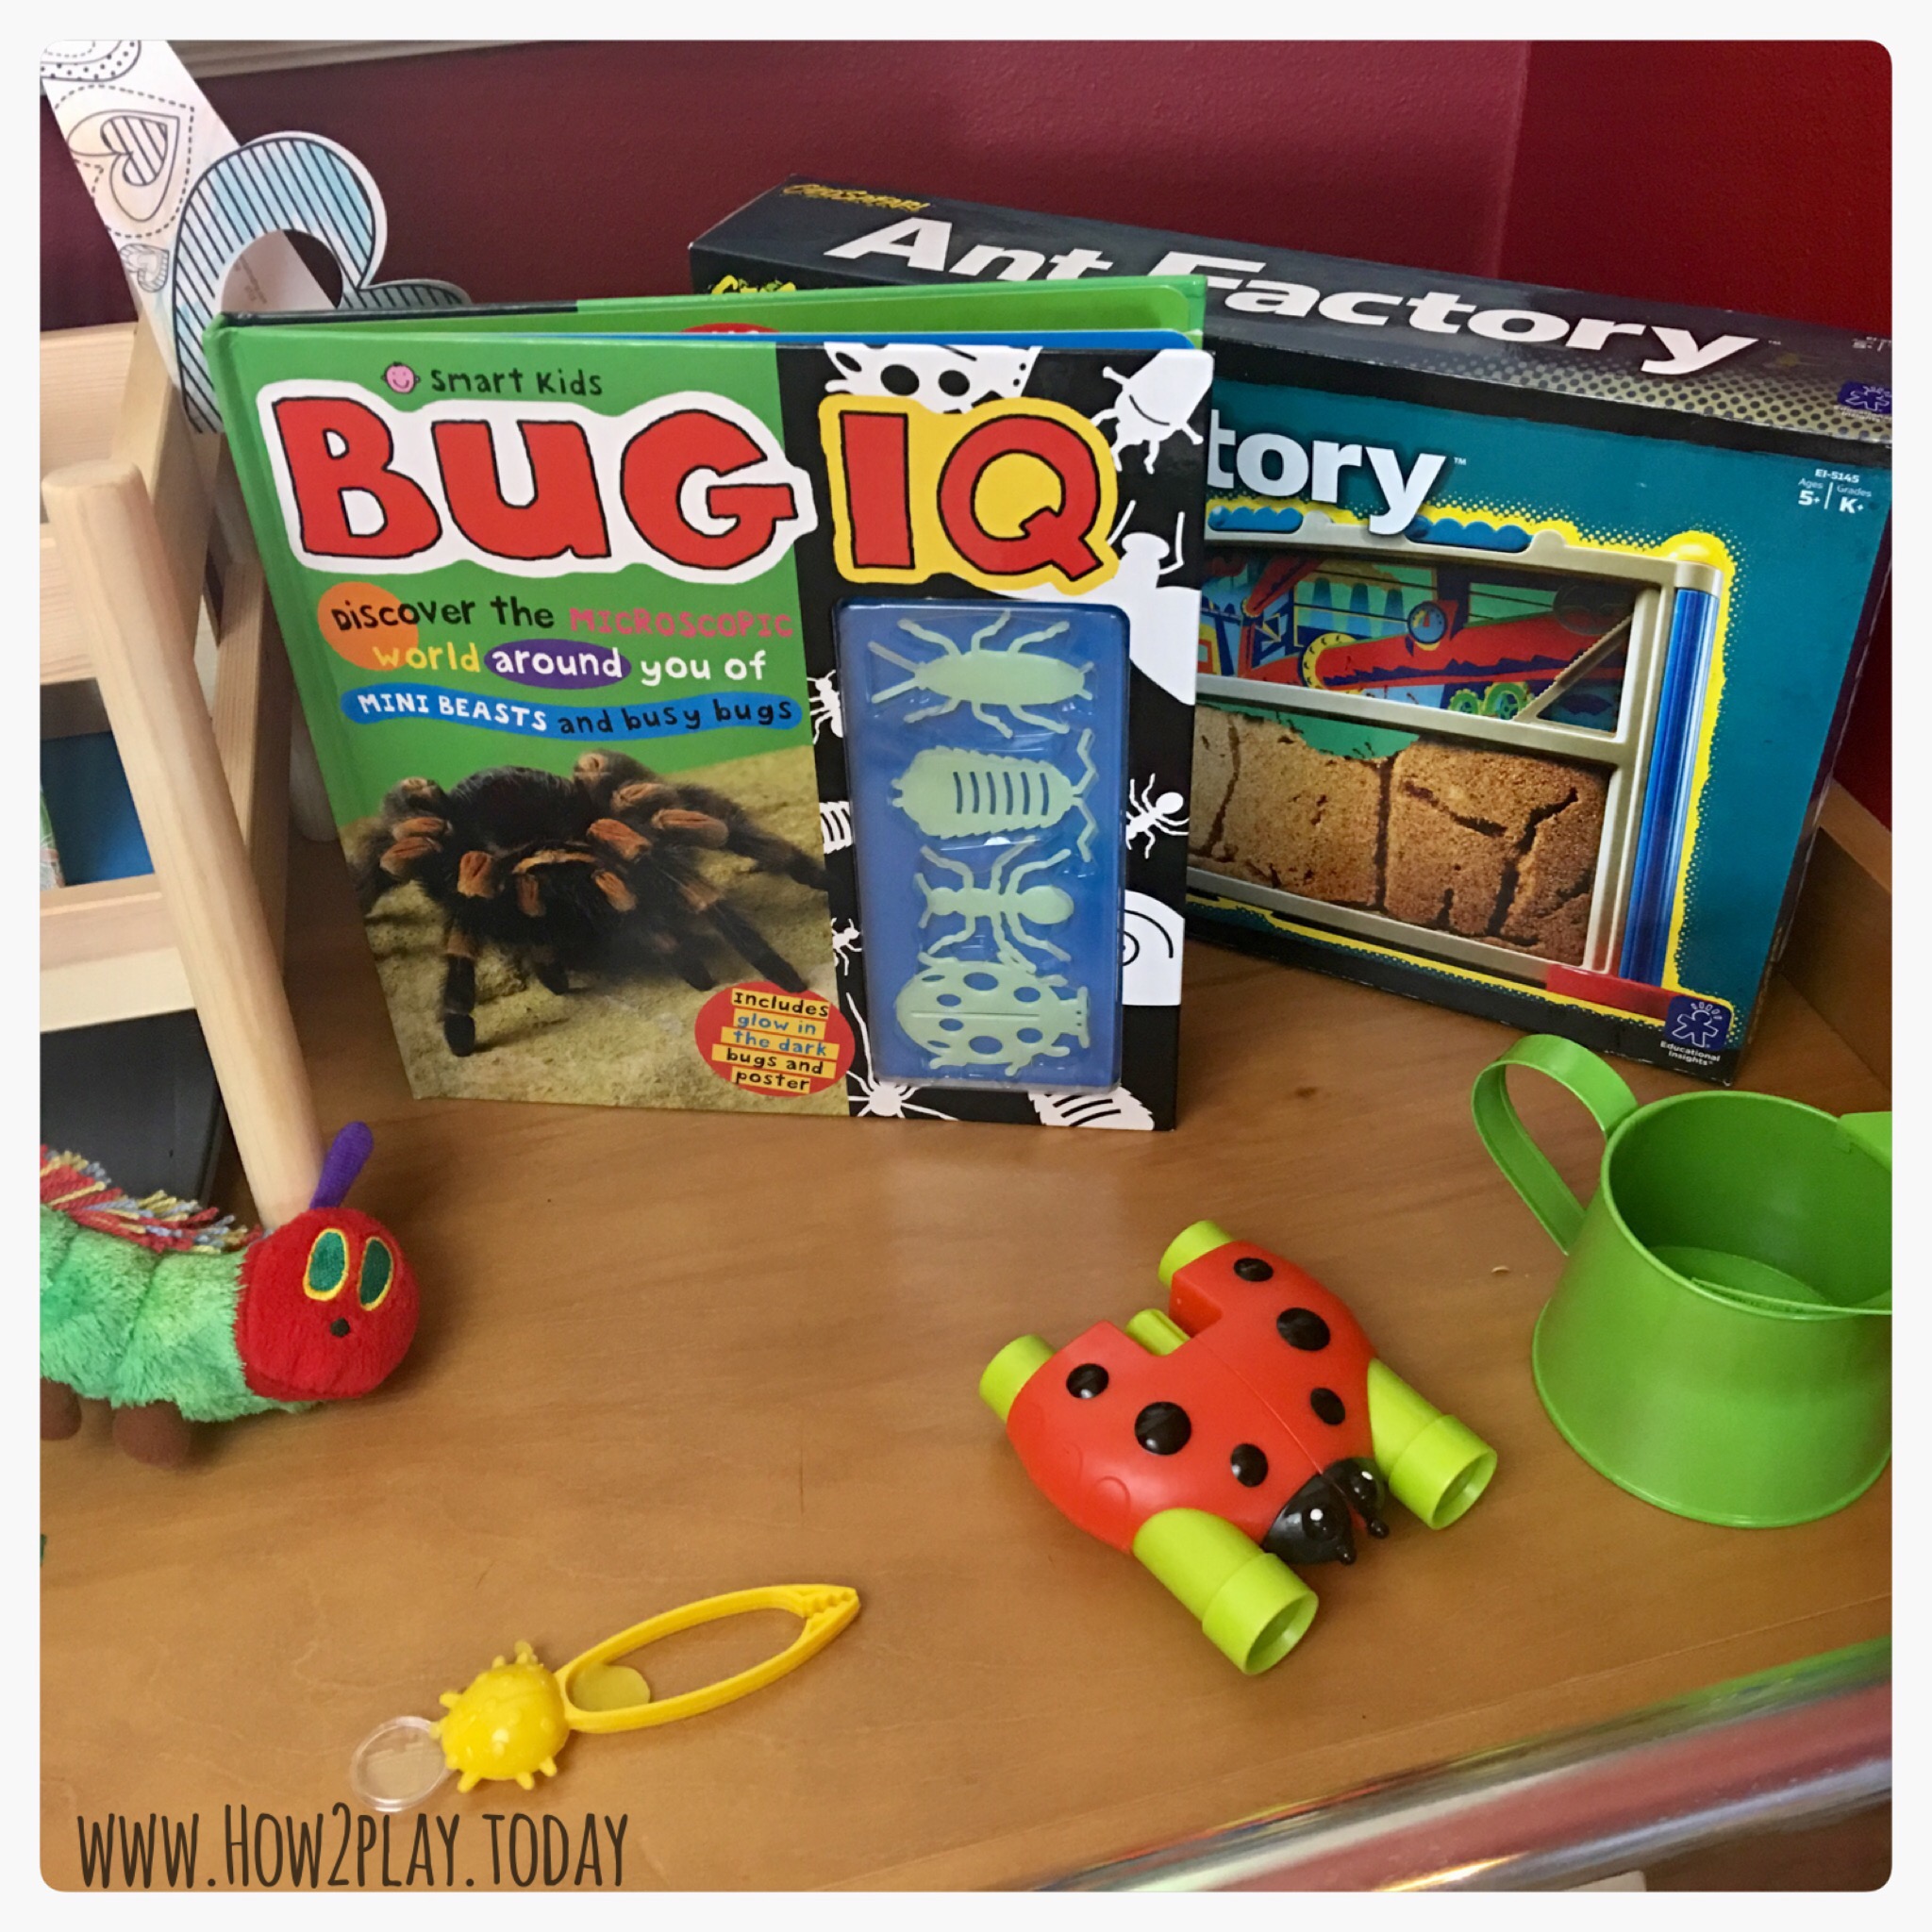 Bug IQ poster adds fun and facts to our Bugs and Crawly Things curriculum. @how2playtoday